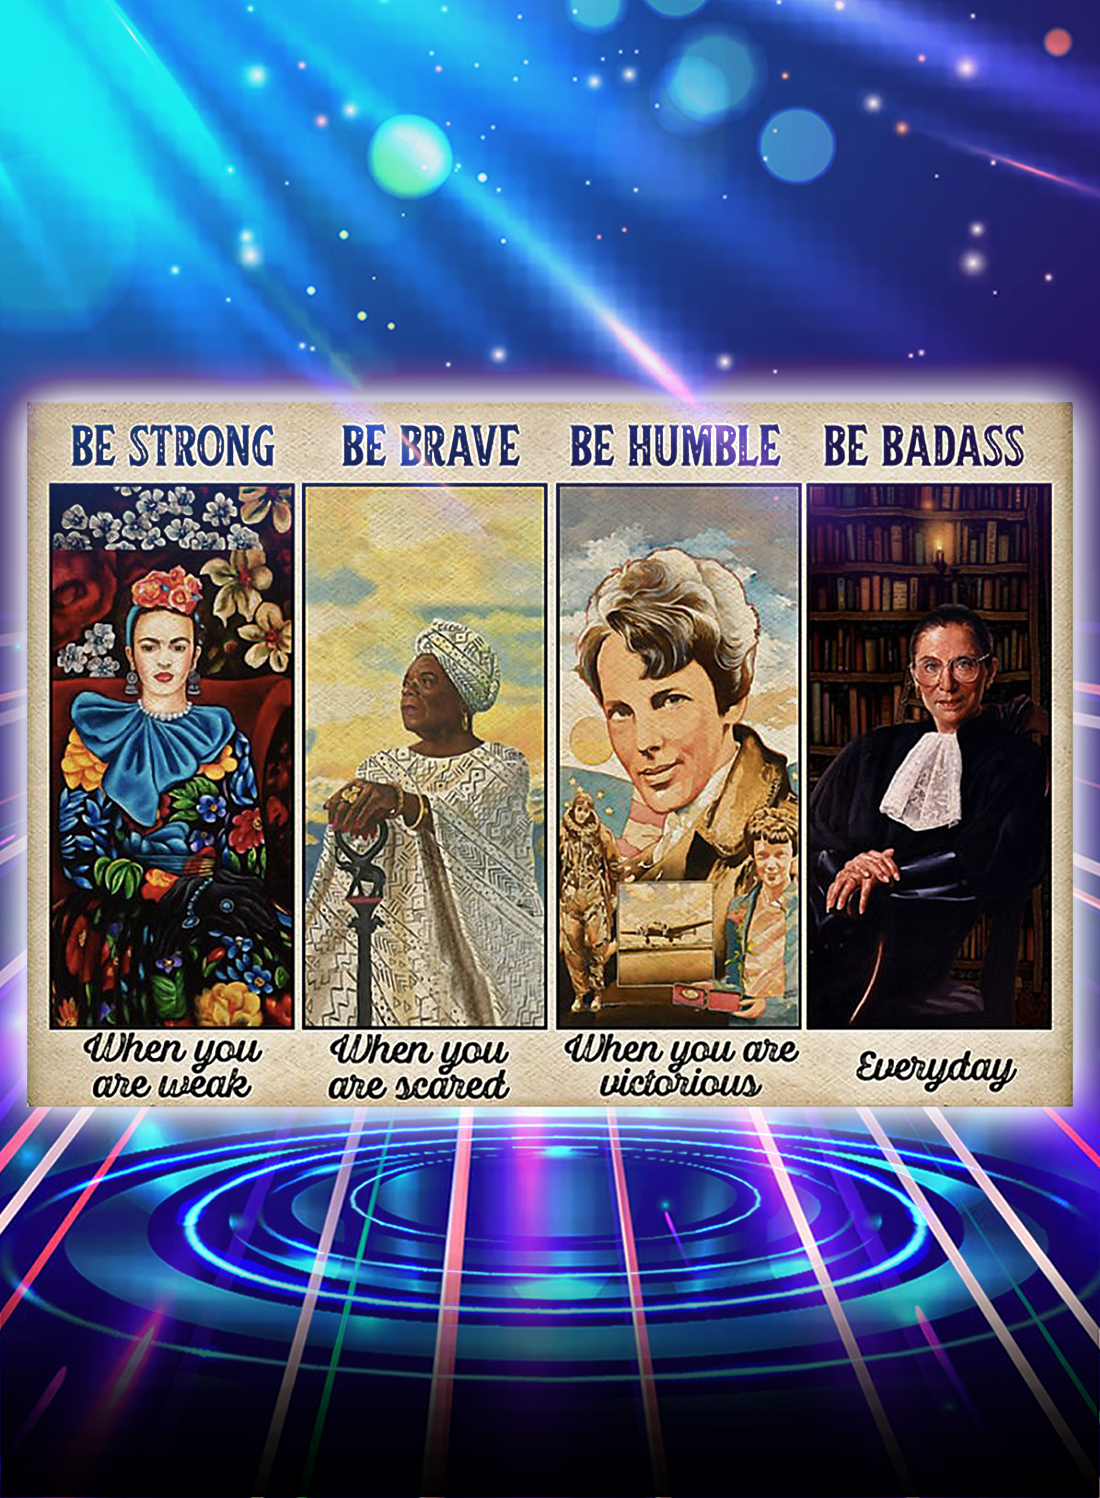 Feminist Frida Kahlo RBG be strong be brave be humble be badass poster - A4